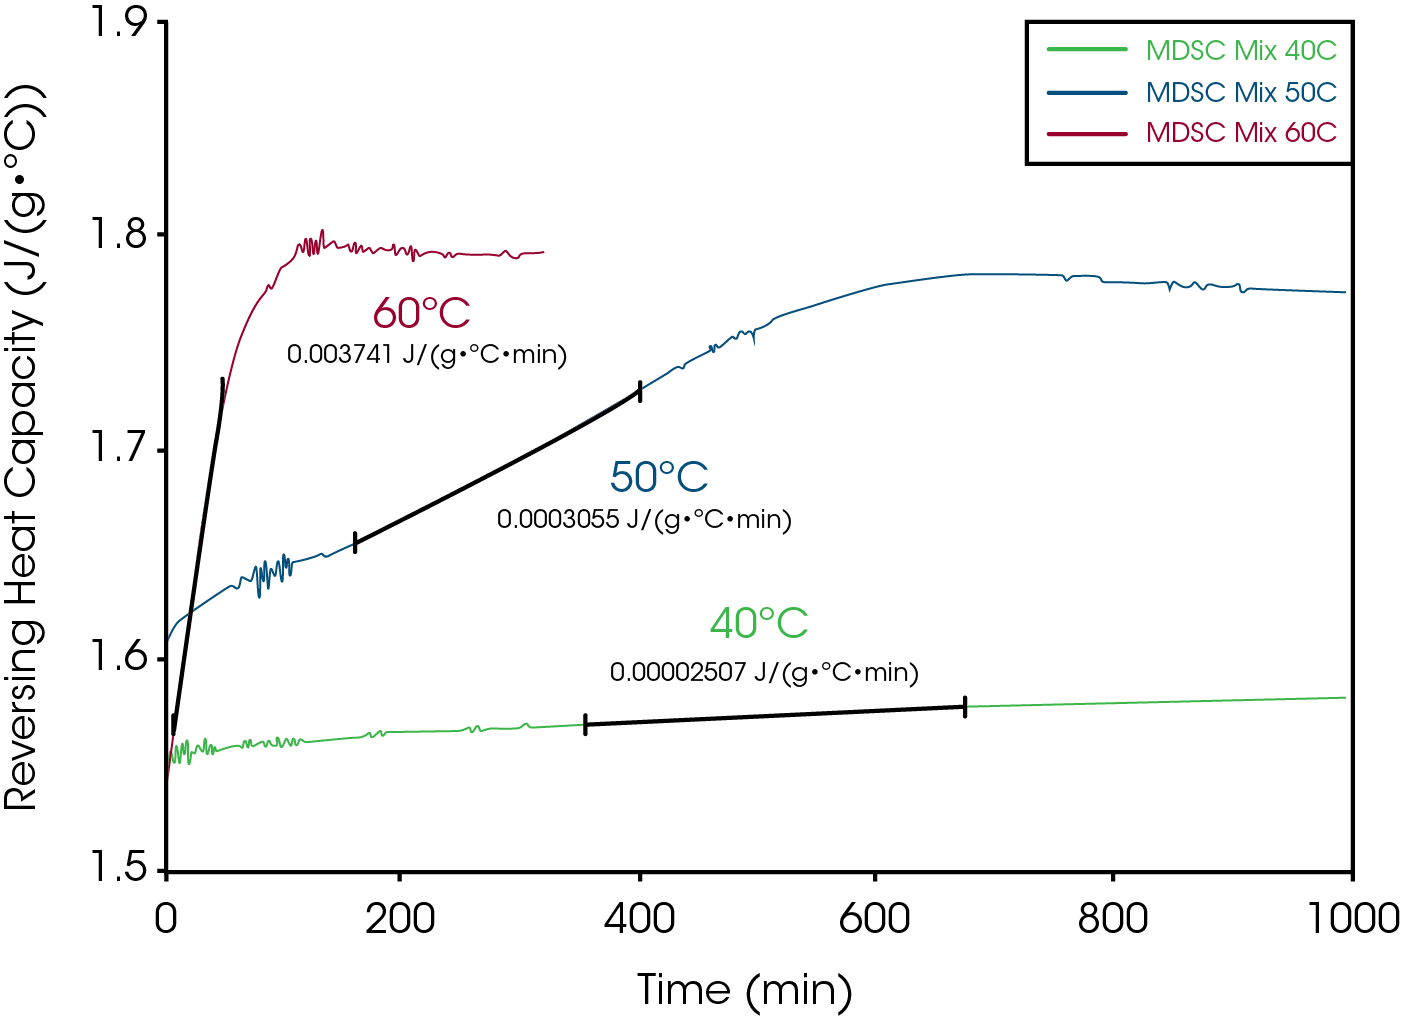 Figure 11: Quasi-isothermal MDSC® experiments at 40, 50, and 60°C show how heat capacity increases with time due to chemical interaction between Aspirin (API) and Magnesium Stearate (excipient). The slope of the heat capacity curves is a measure of the reaction rate and can be used to create an Arrhenius plot as seen in Figure 12.